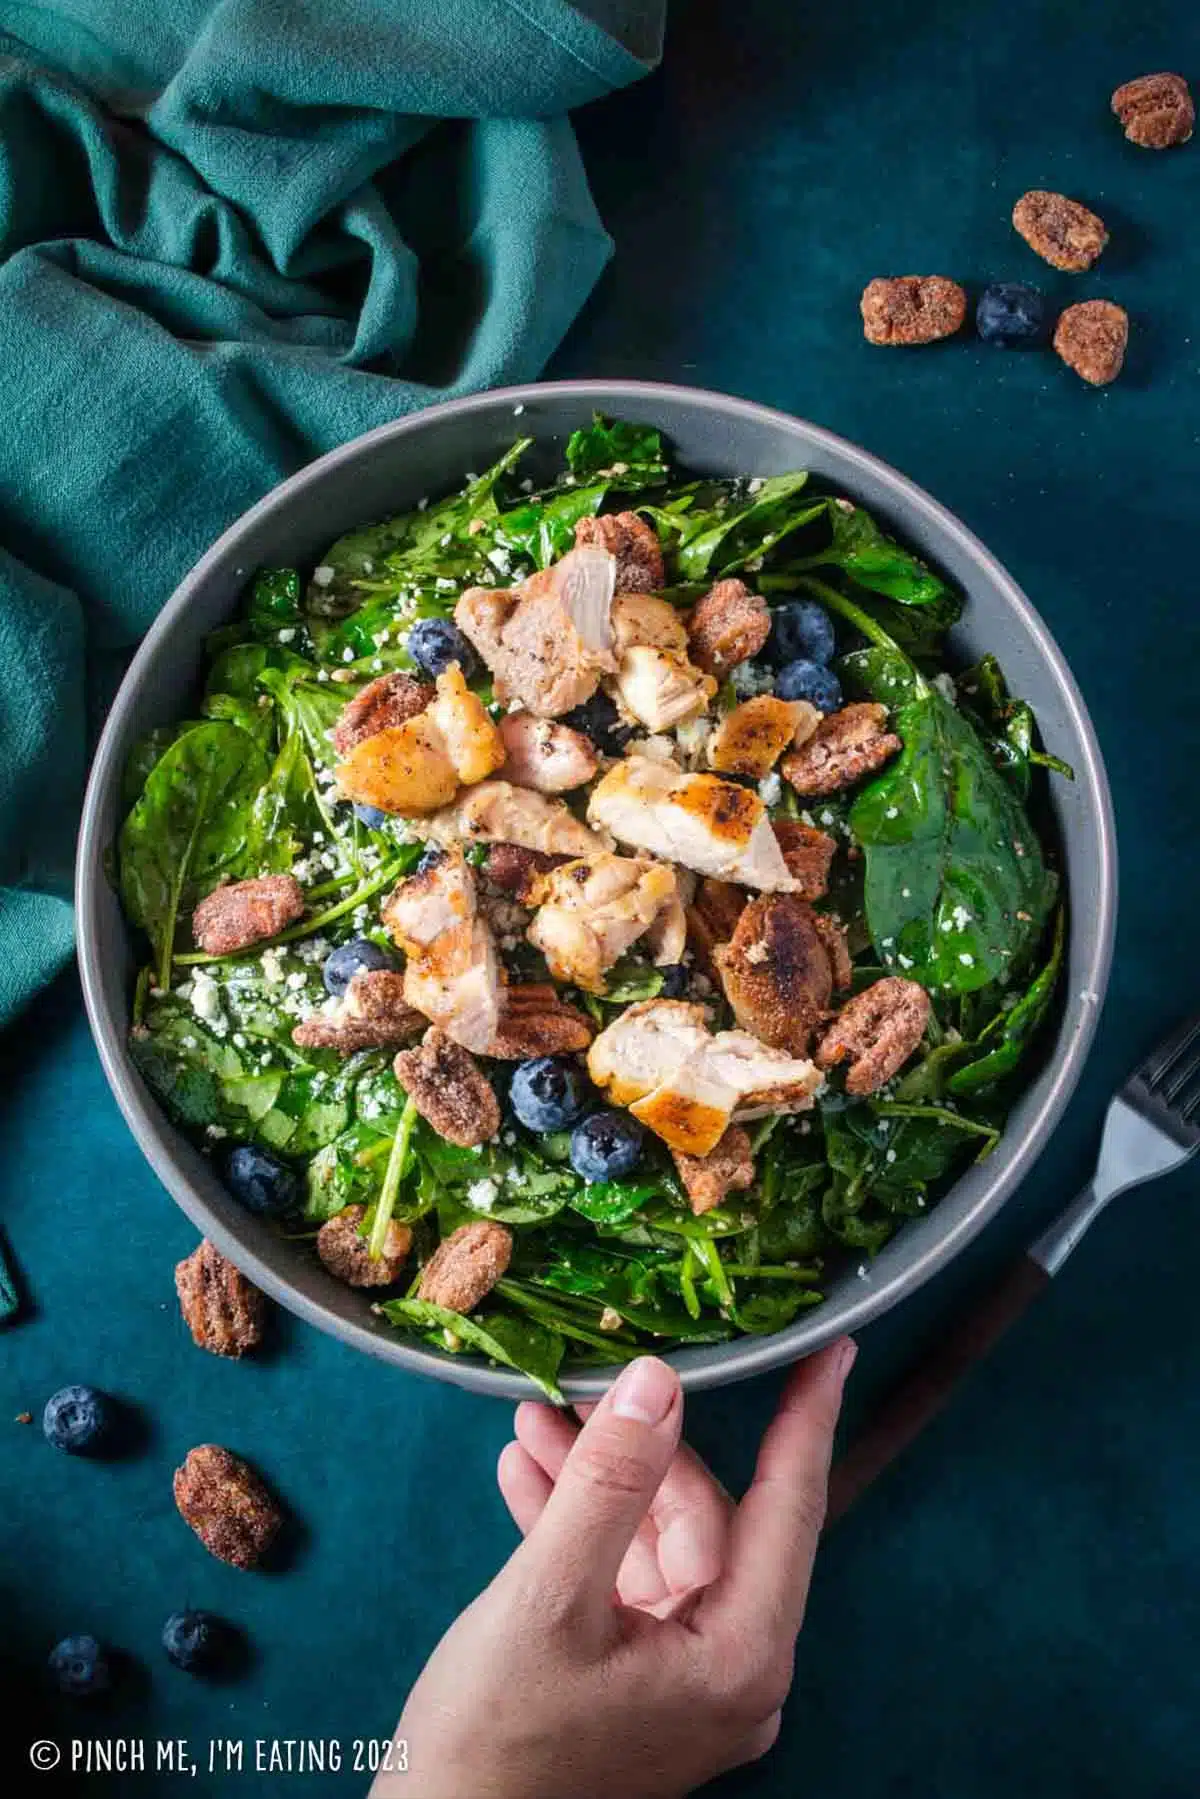 Spinach arugula salad with chicken, topped with blueberries, blue cheese, and pecans in a gray bowl.